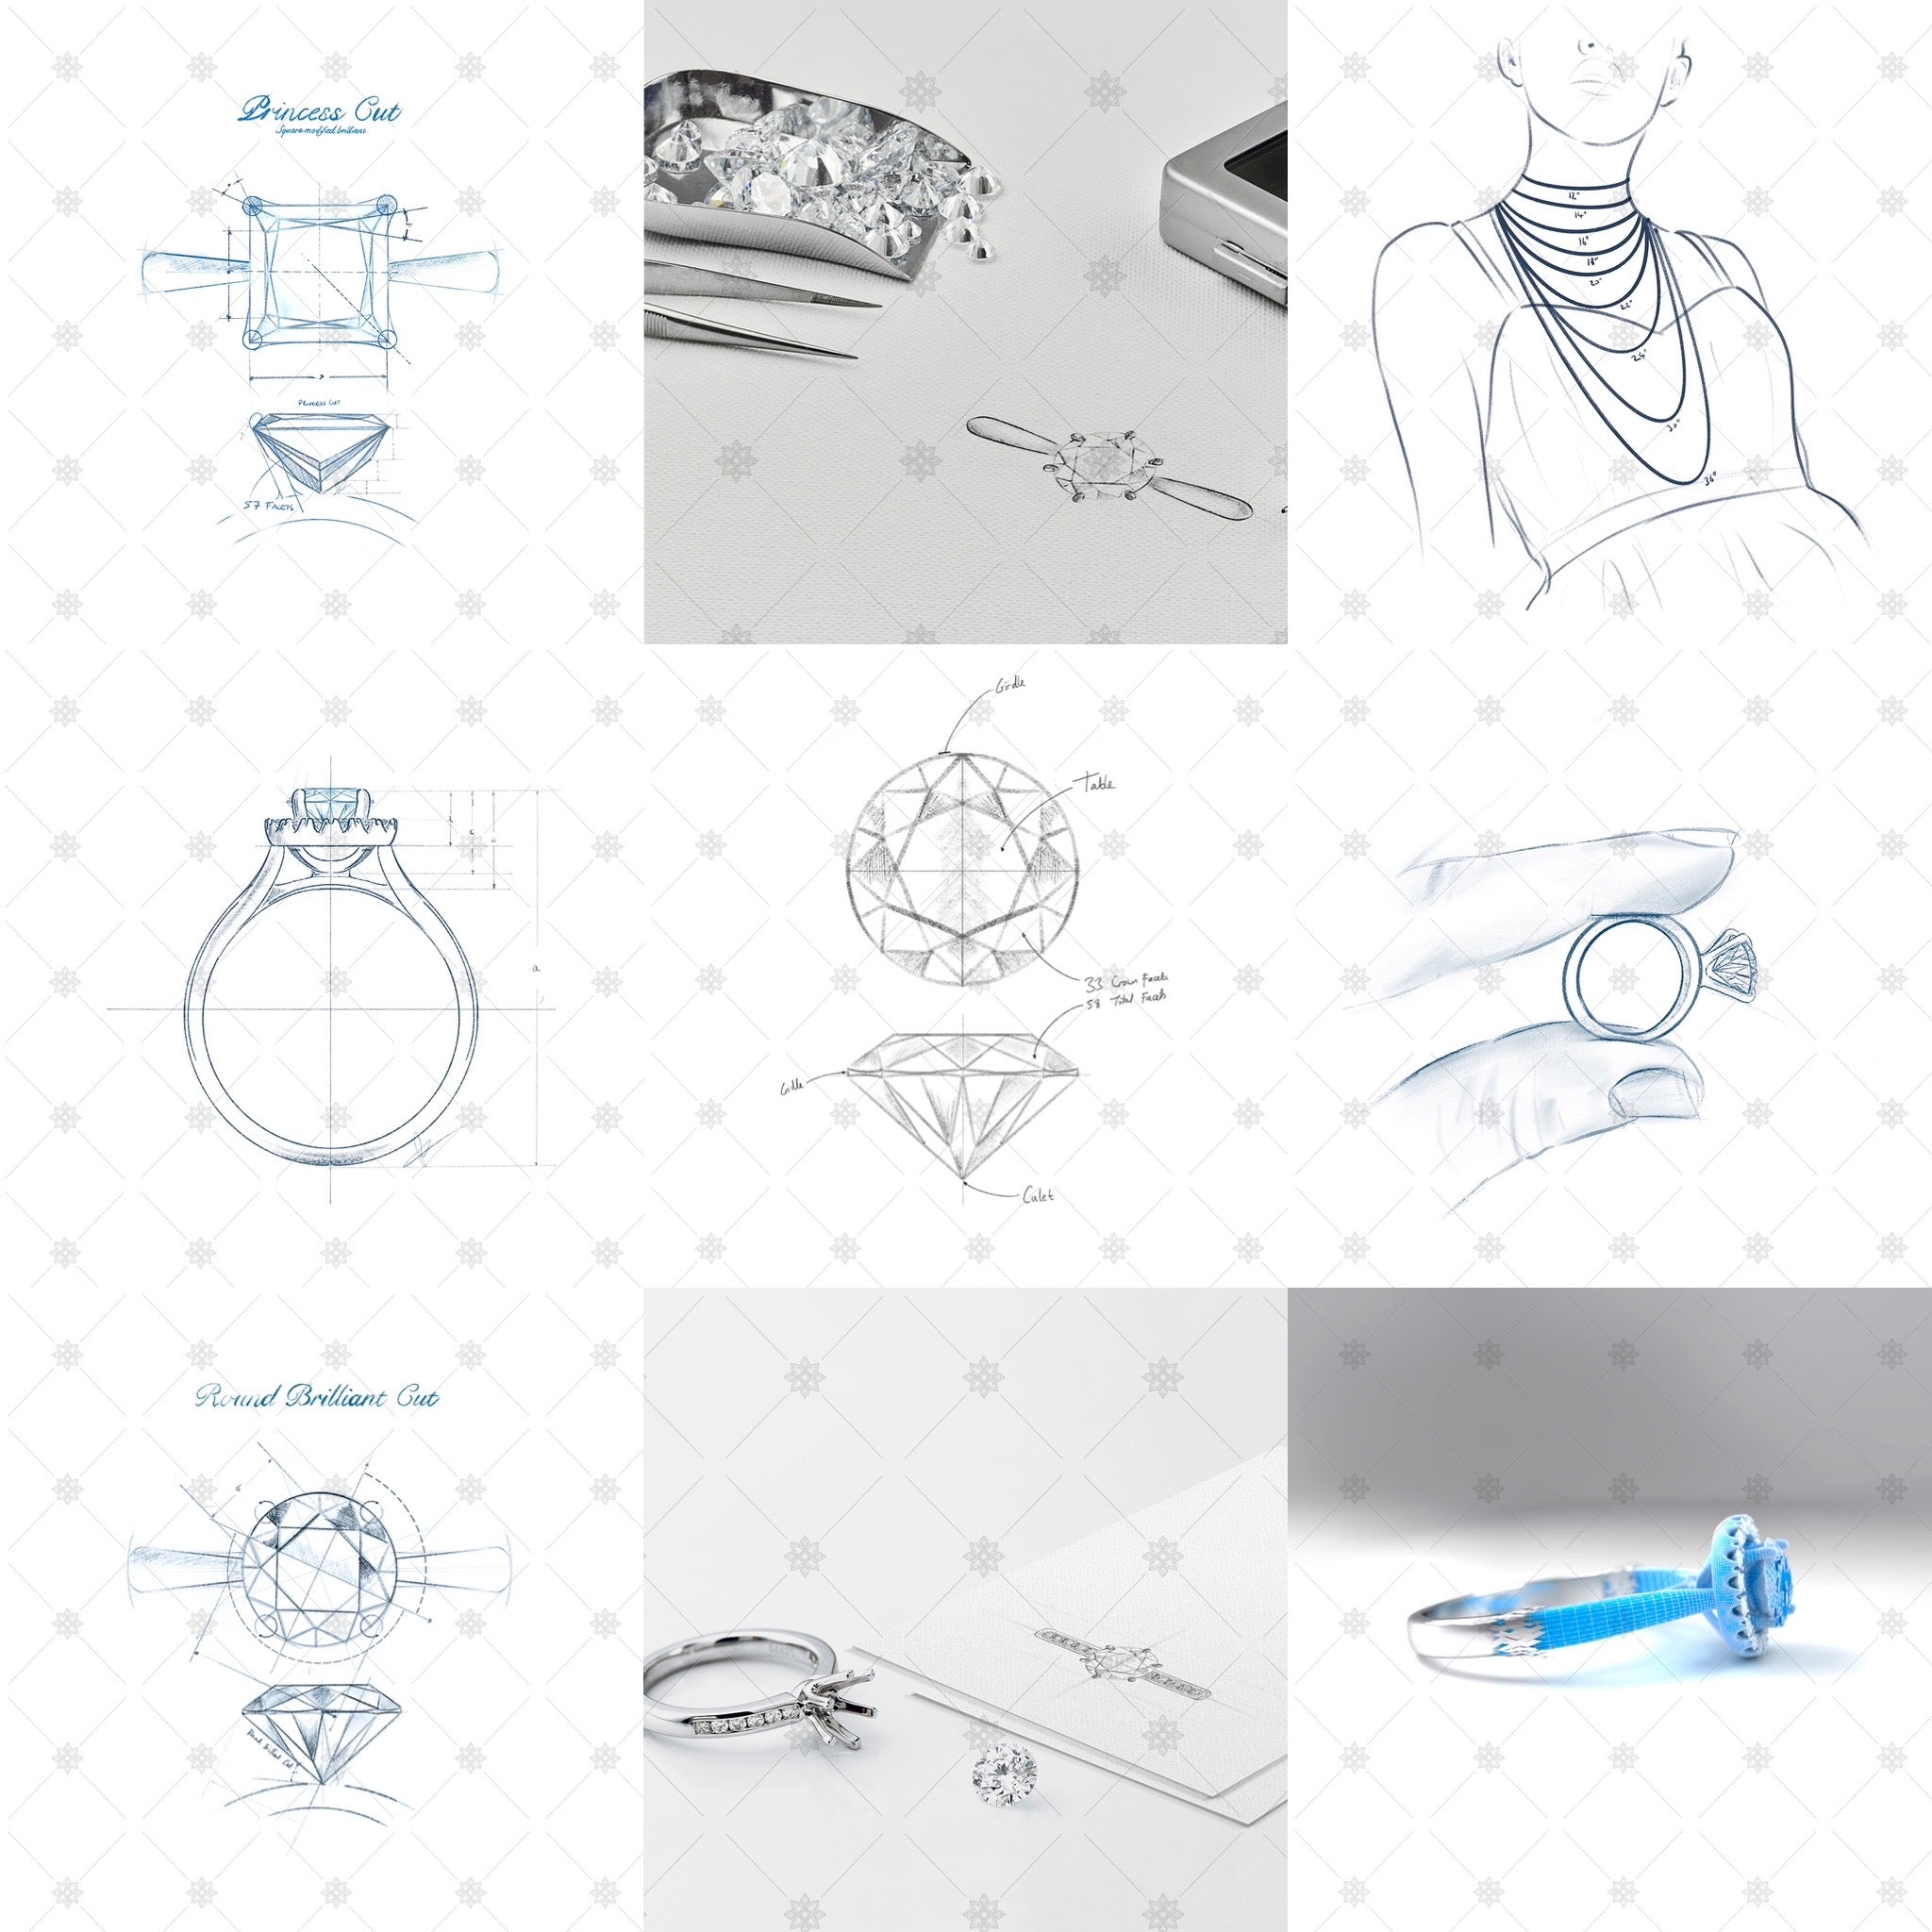 How to draw a Fashion Diamond Ring pencil sketch by Art Jewellery Design   YouTube  Jewellery design sketches Art jewelry design Accessories design  sketch